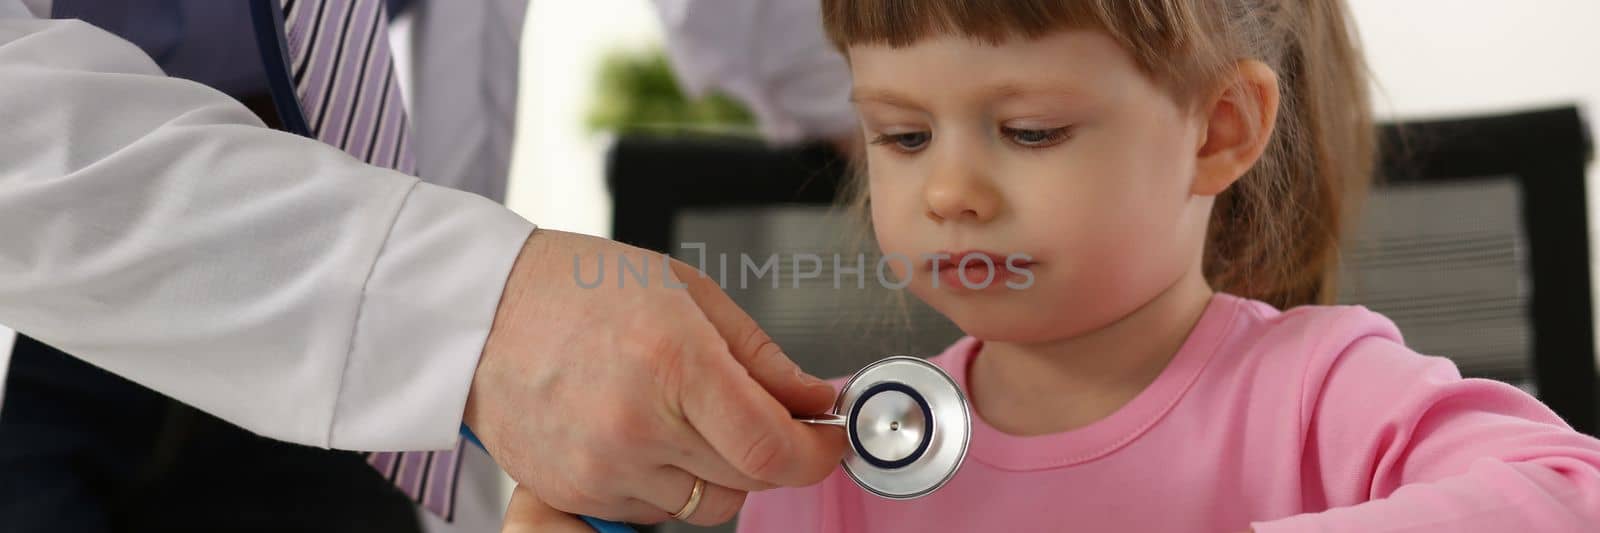 Hands of pediatrician doctor examining small child with stethoscope by kuprevich